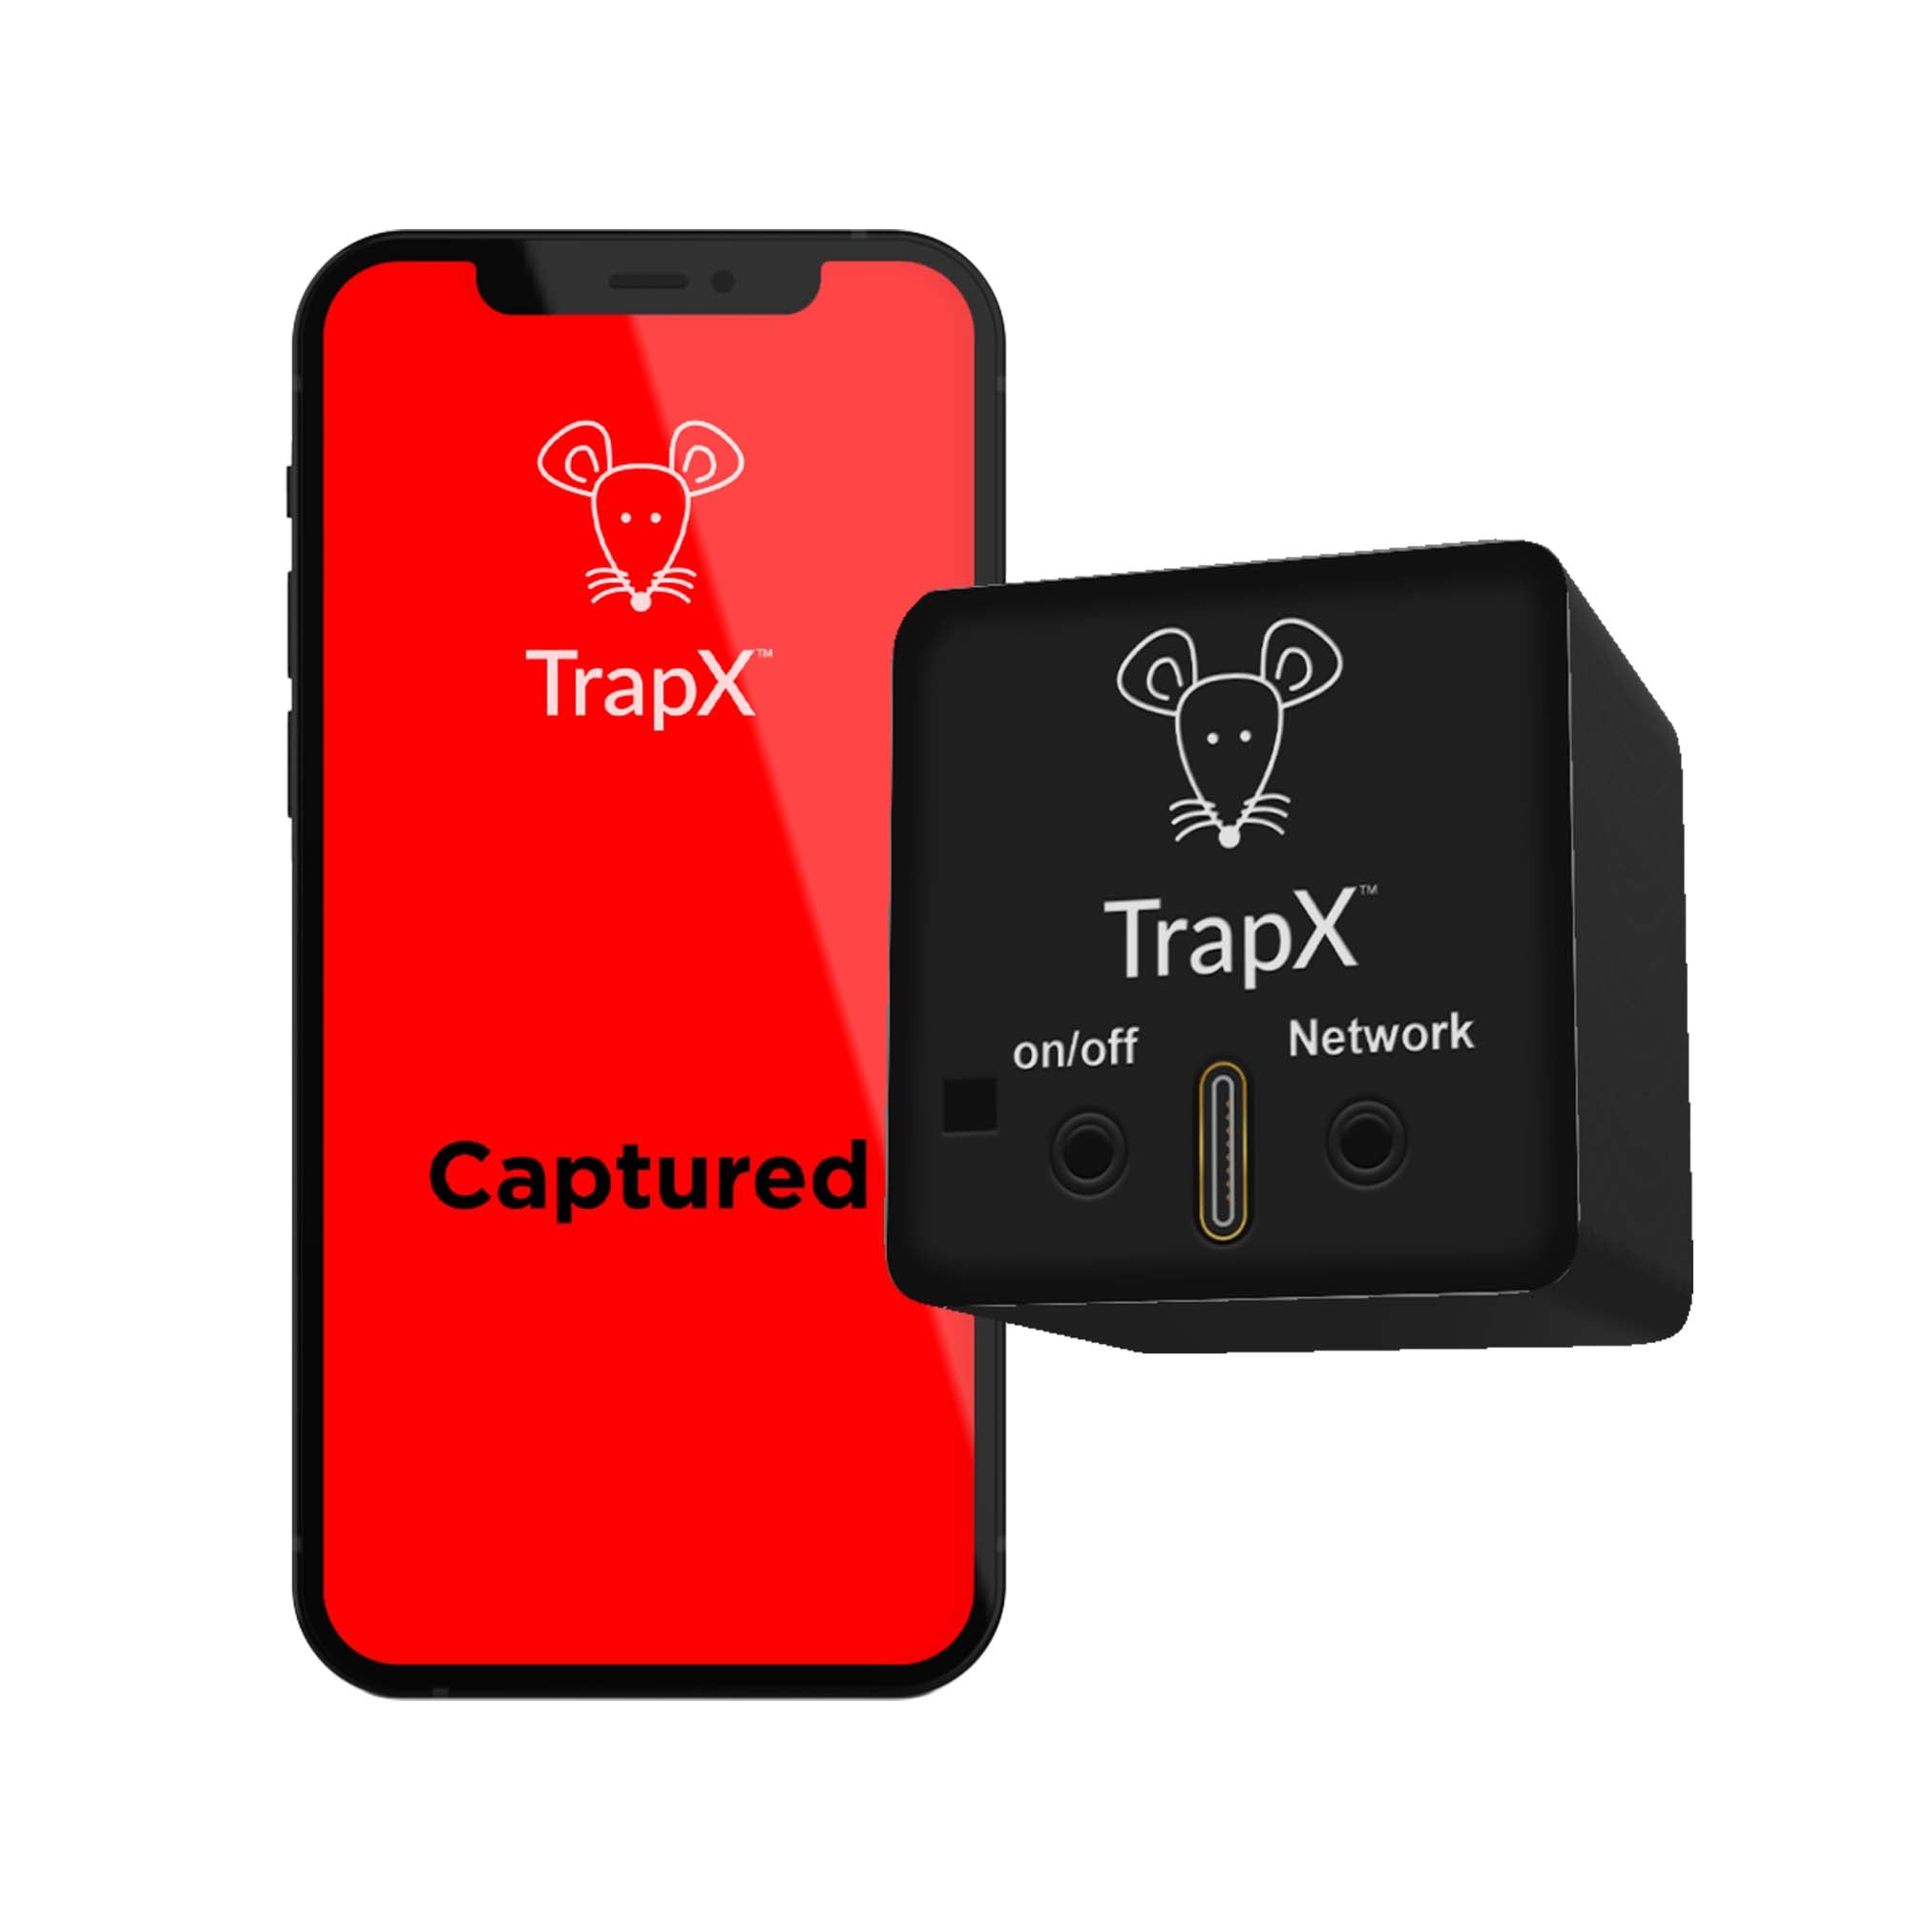 What are the benefits of using TrapX Mice Gel?